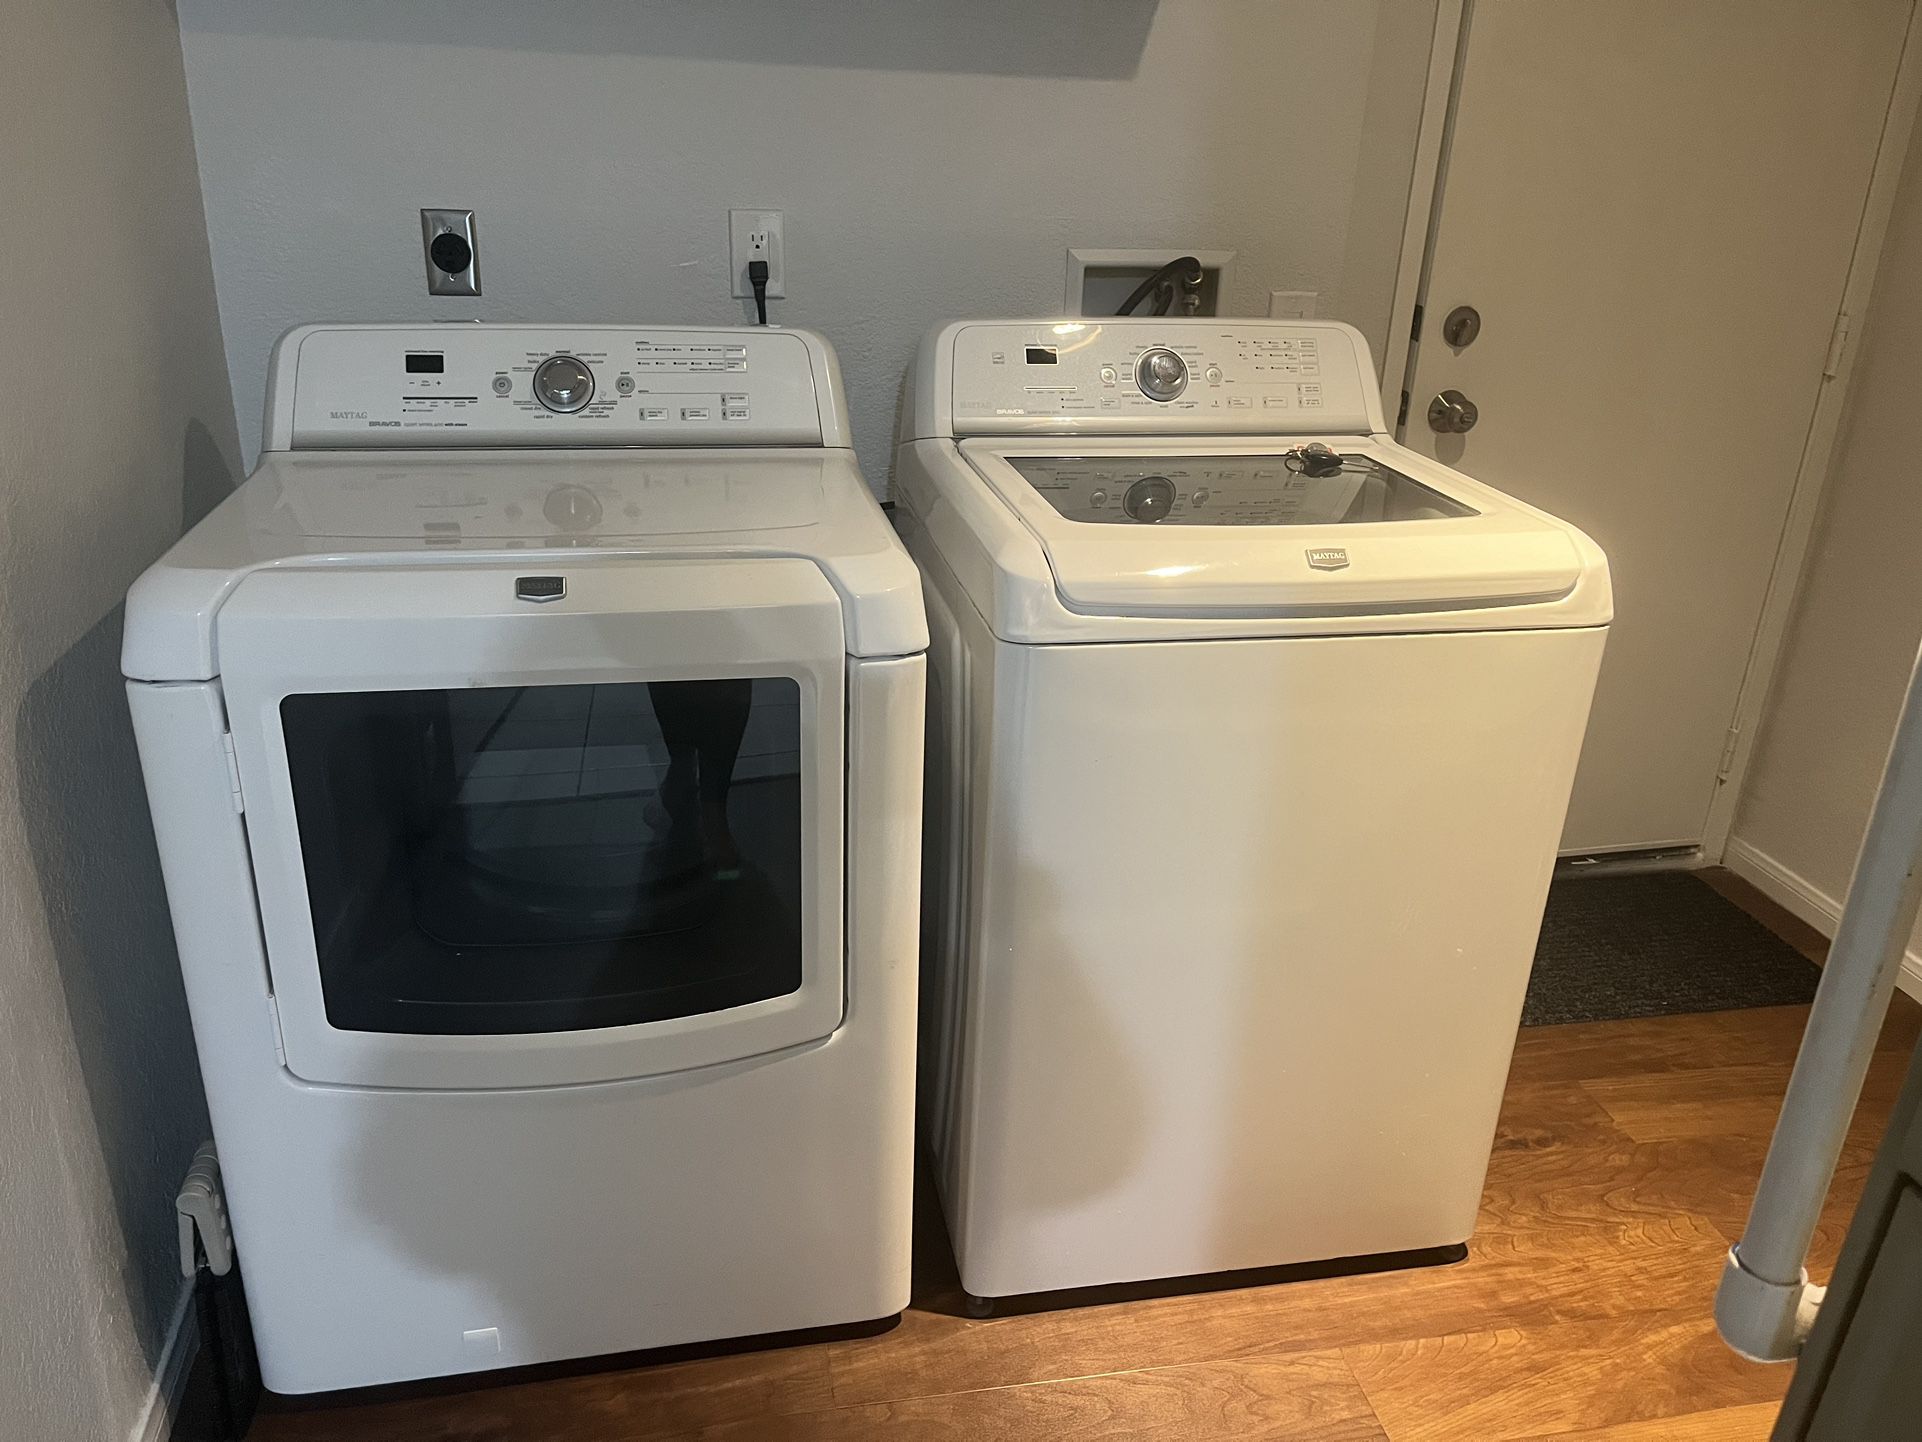 Maytag Washer And Dryer For Sale